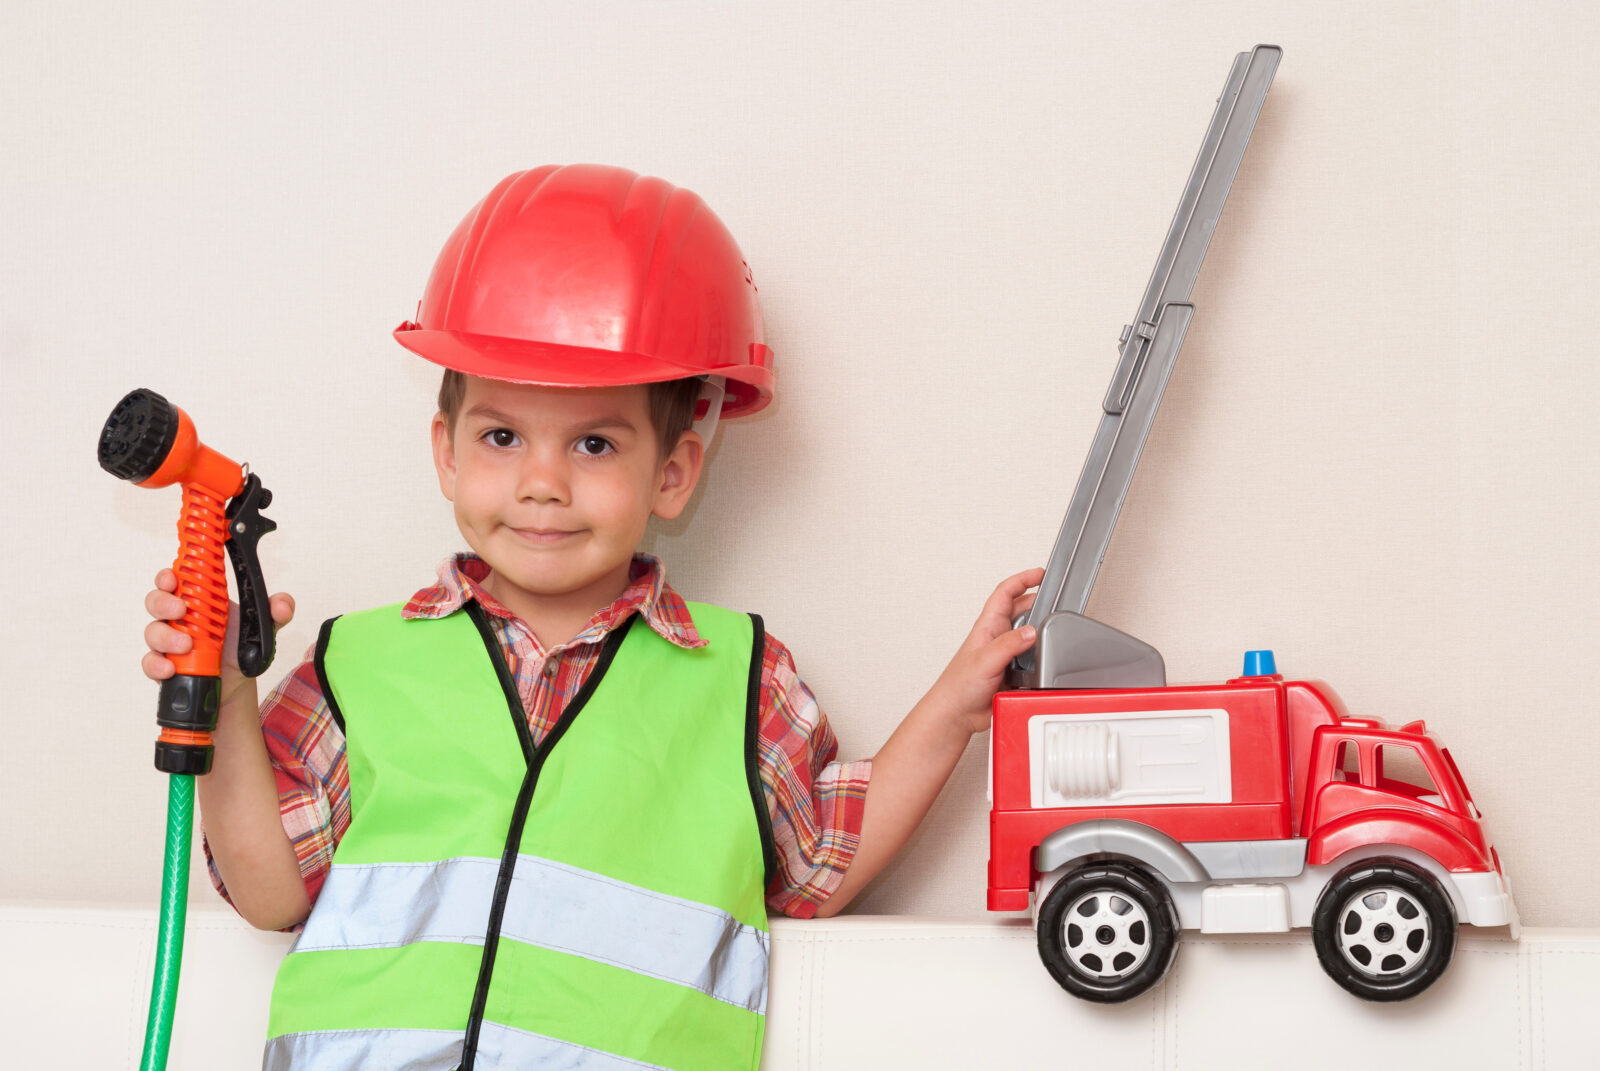 Little boy dressed in safety gear holding a toy firetruck and water hose.